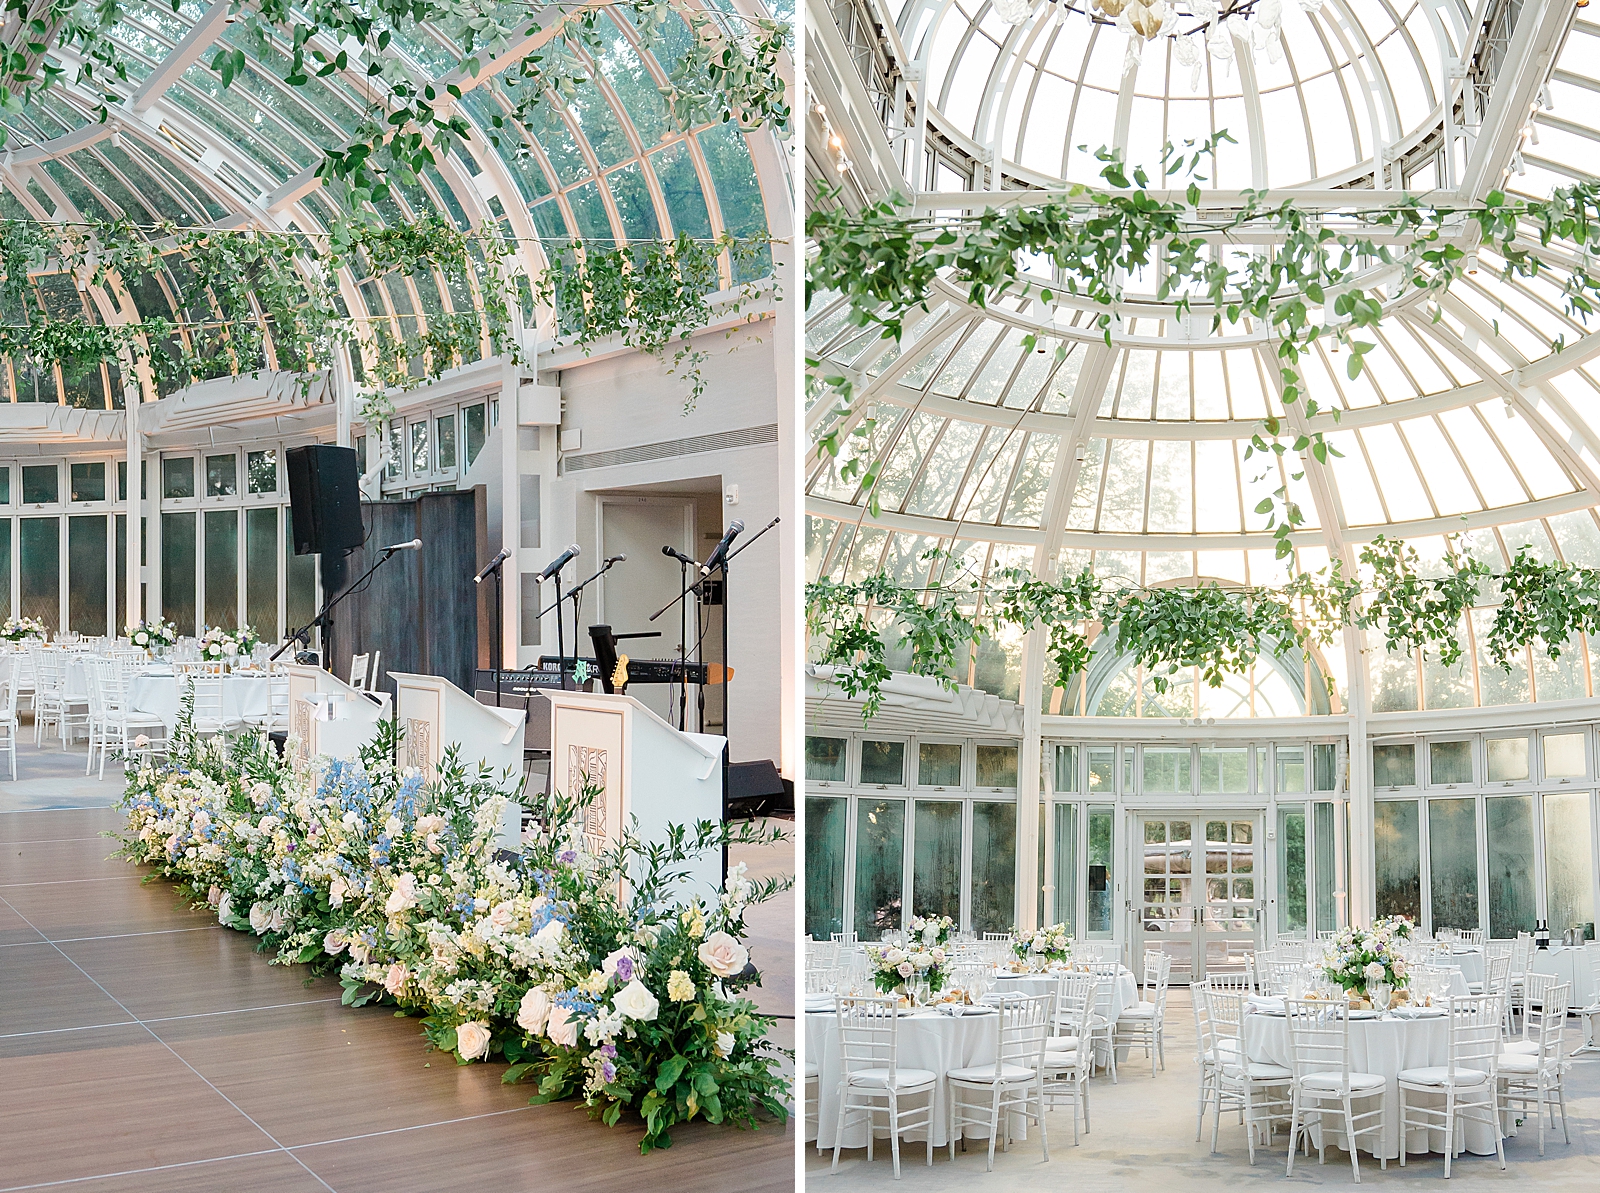 Left photo: Shot of the reception bands stage. 
Right photo: Vertical shot of the reception space, complete with white table linens and chairs, and greenery draped from the ceiling. 